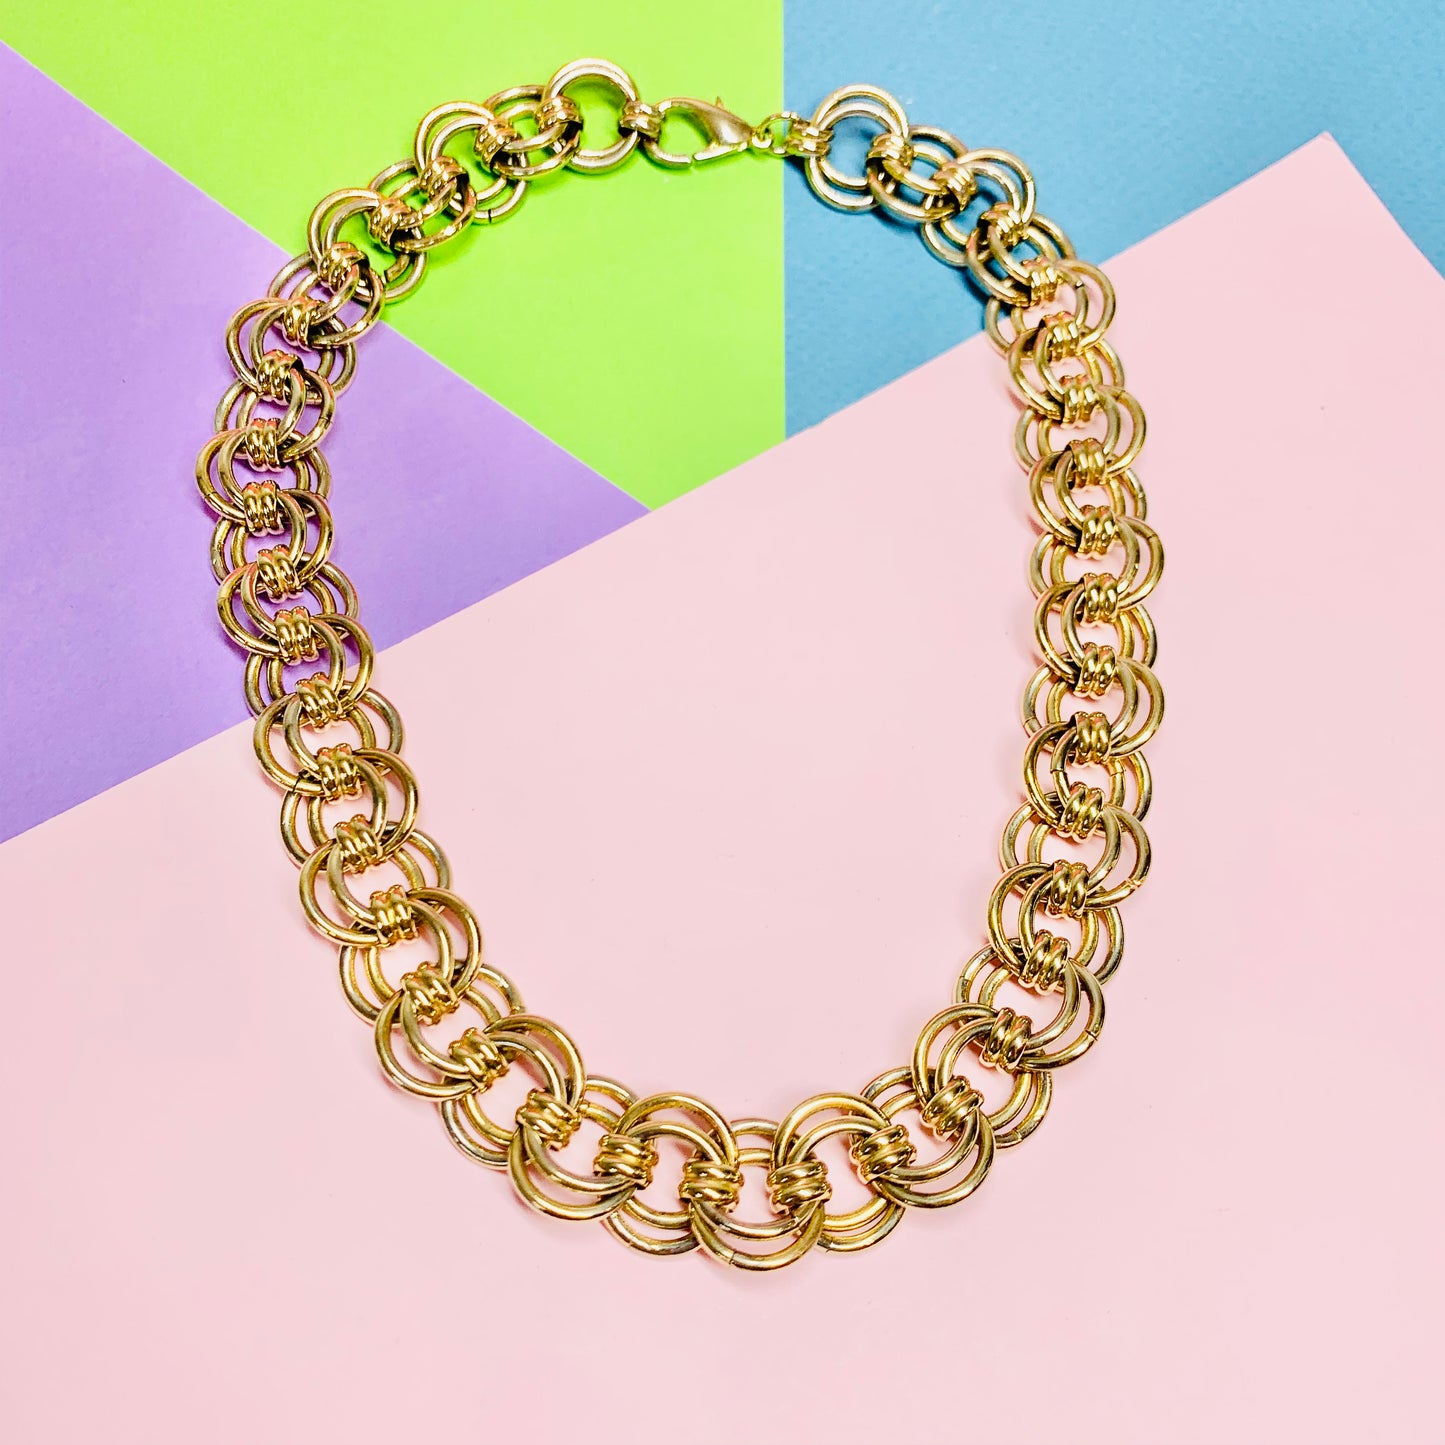 Extremely rare 1970s triple gold plated knot loop necklace by Monet